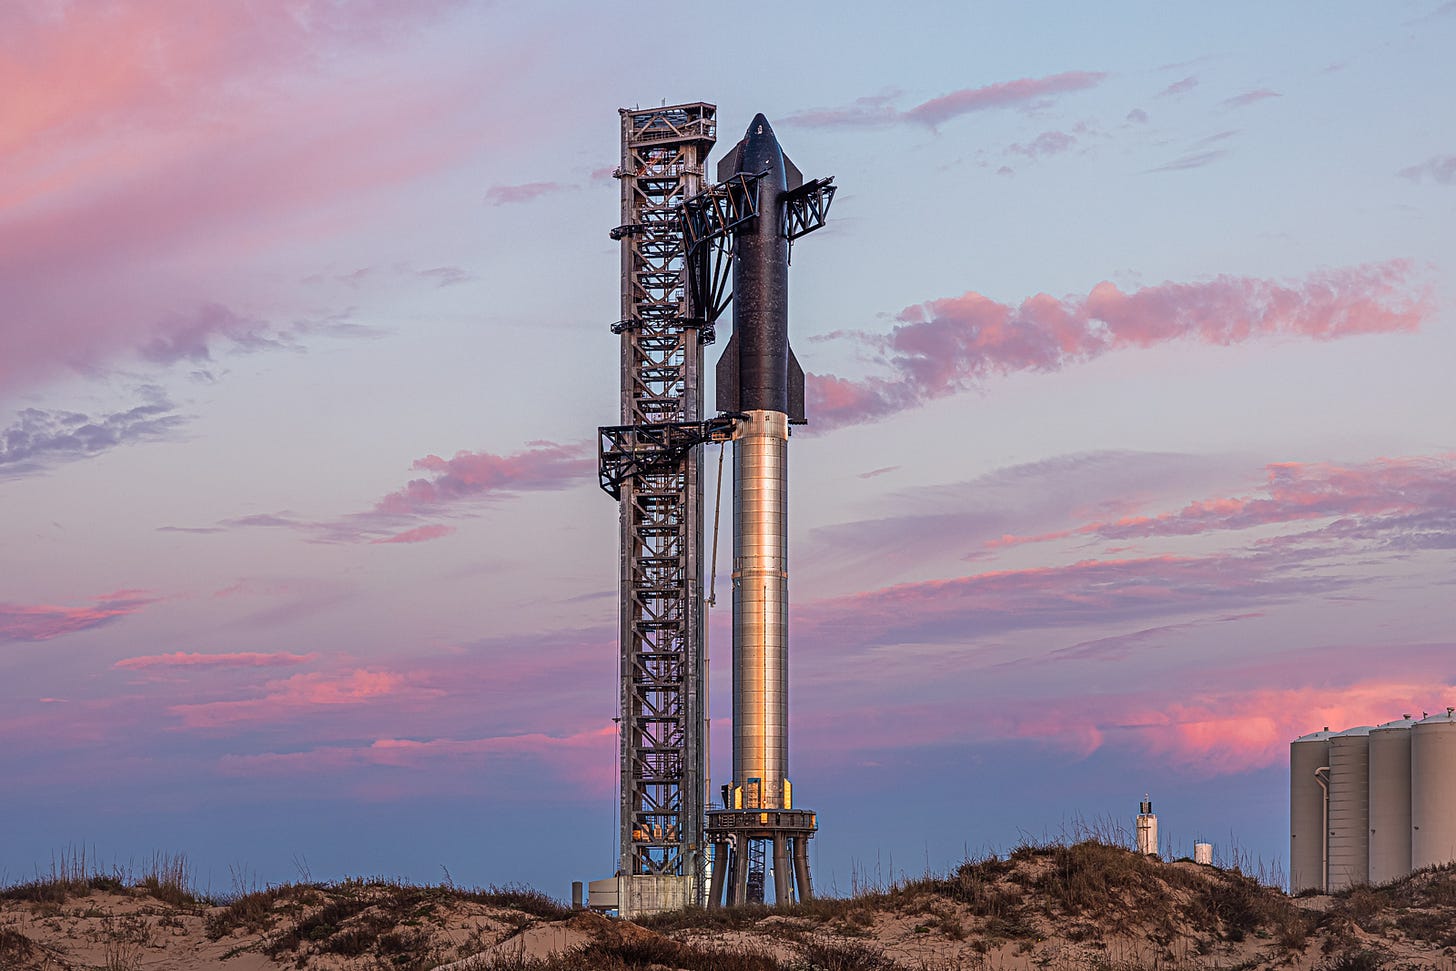 SpaceX moves a massive rocket with 33 engines to its launch pad for tests |  Ars Technica